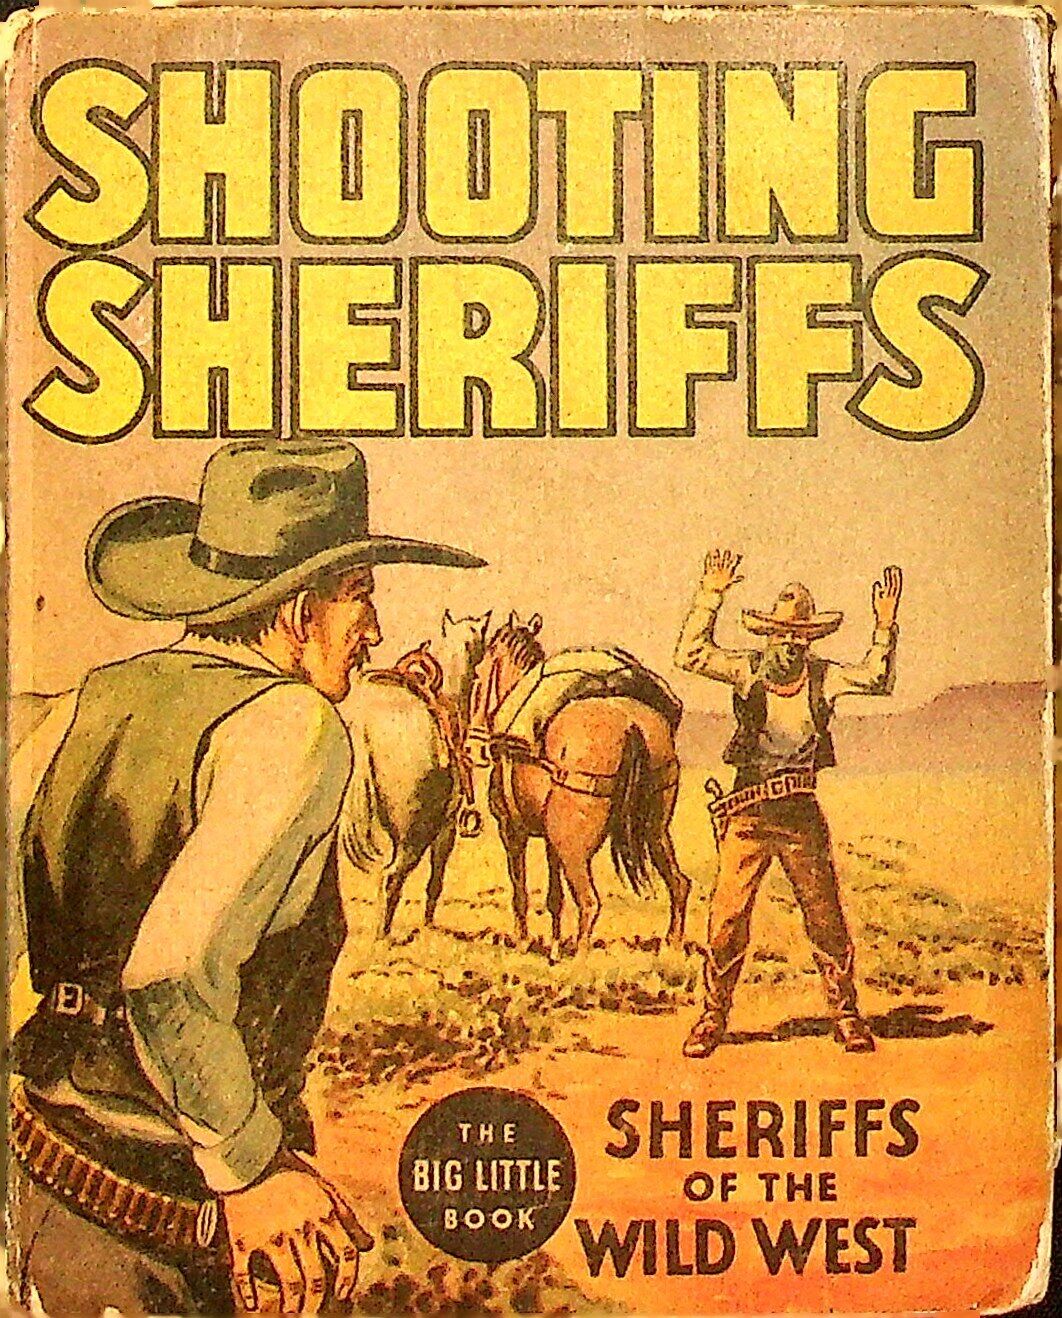 Shooting Sheriffs of the Wild West #1195 FN 1936